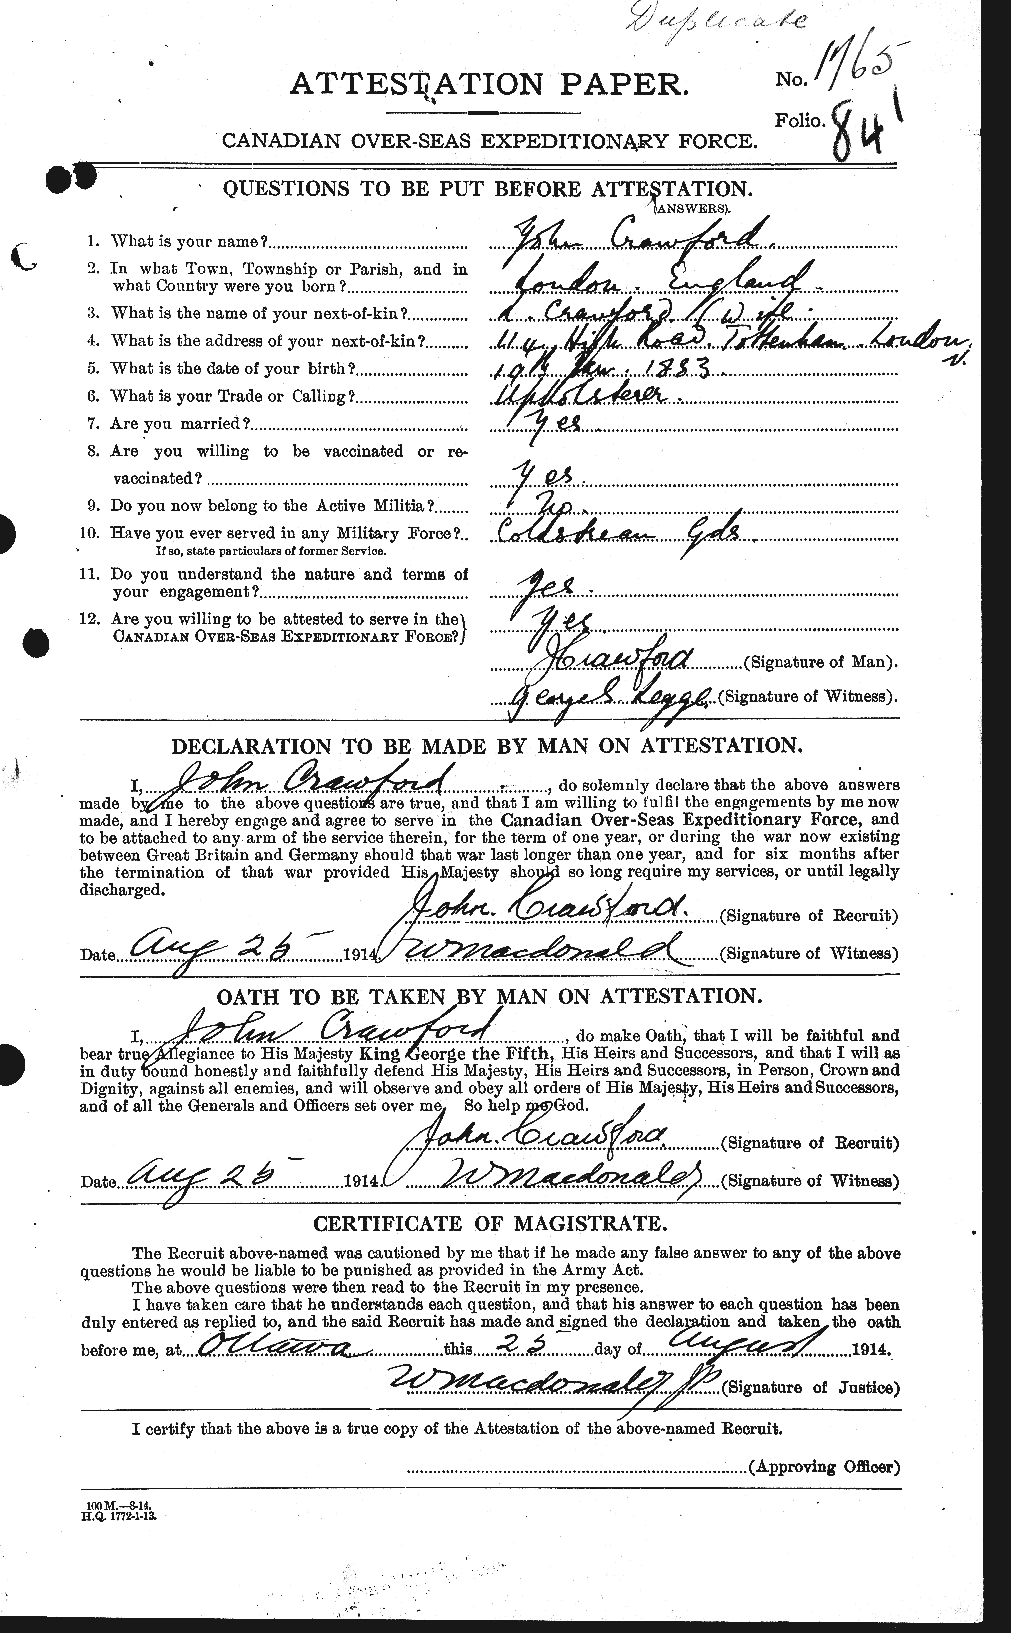 Personnel Records of the First World War - CEF 062441a